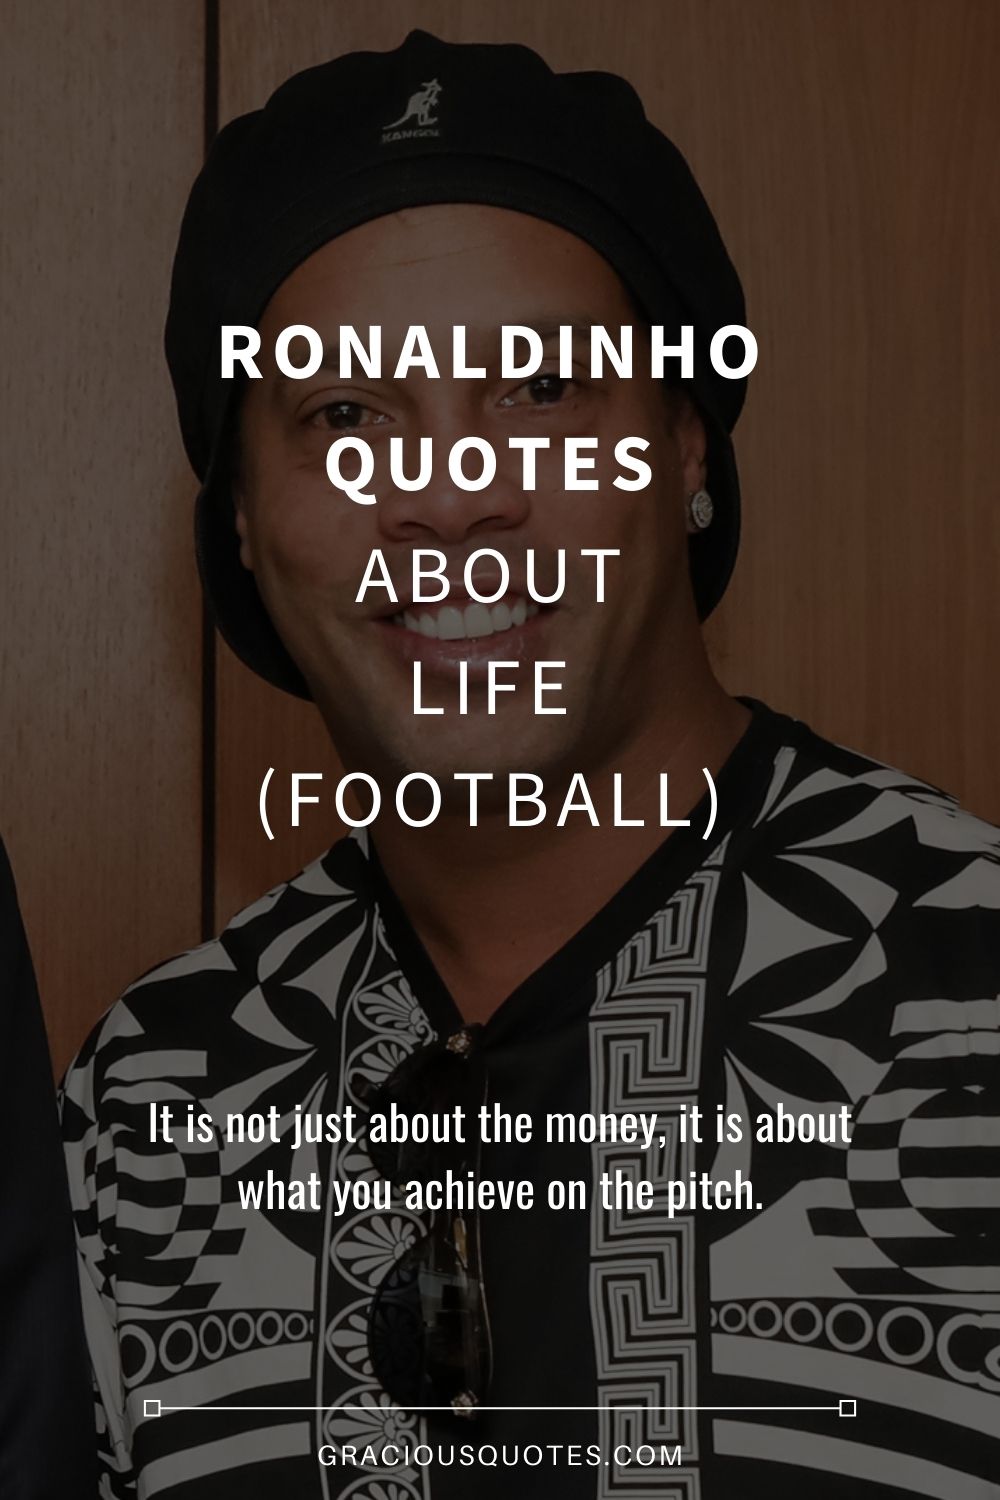 Ronaldinho Quotes About Life (FOOTBALL) - Gracious Quotes